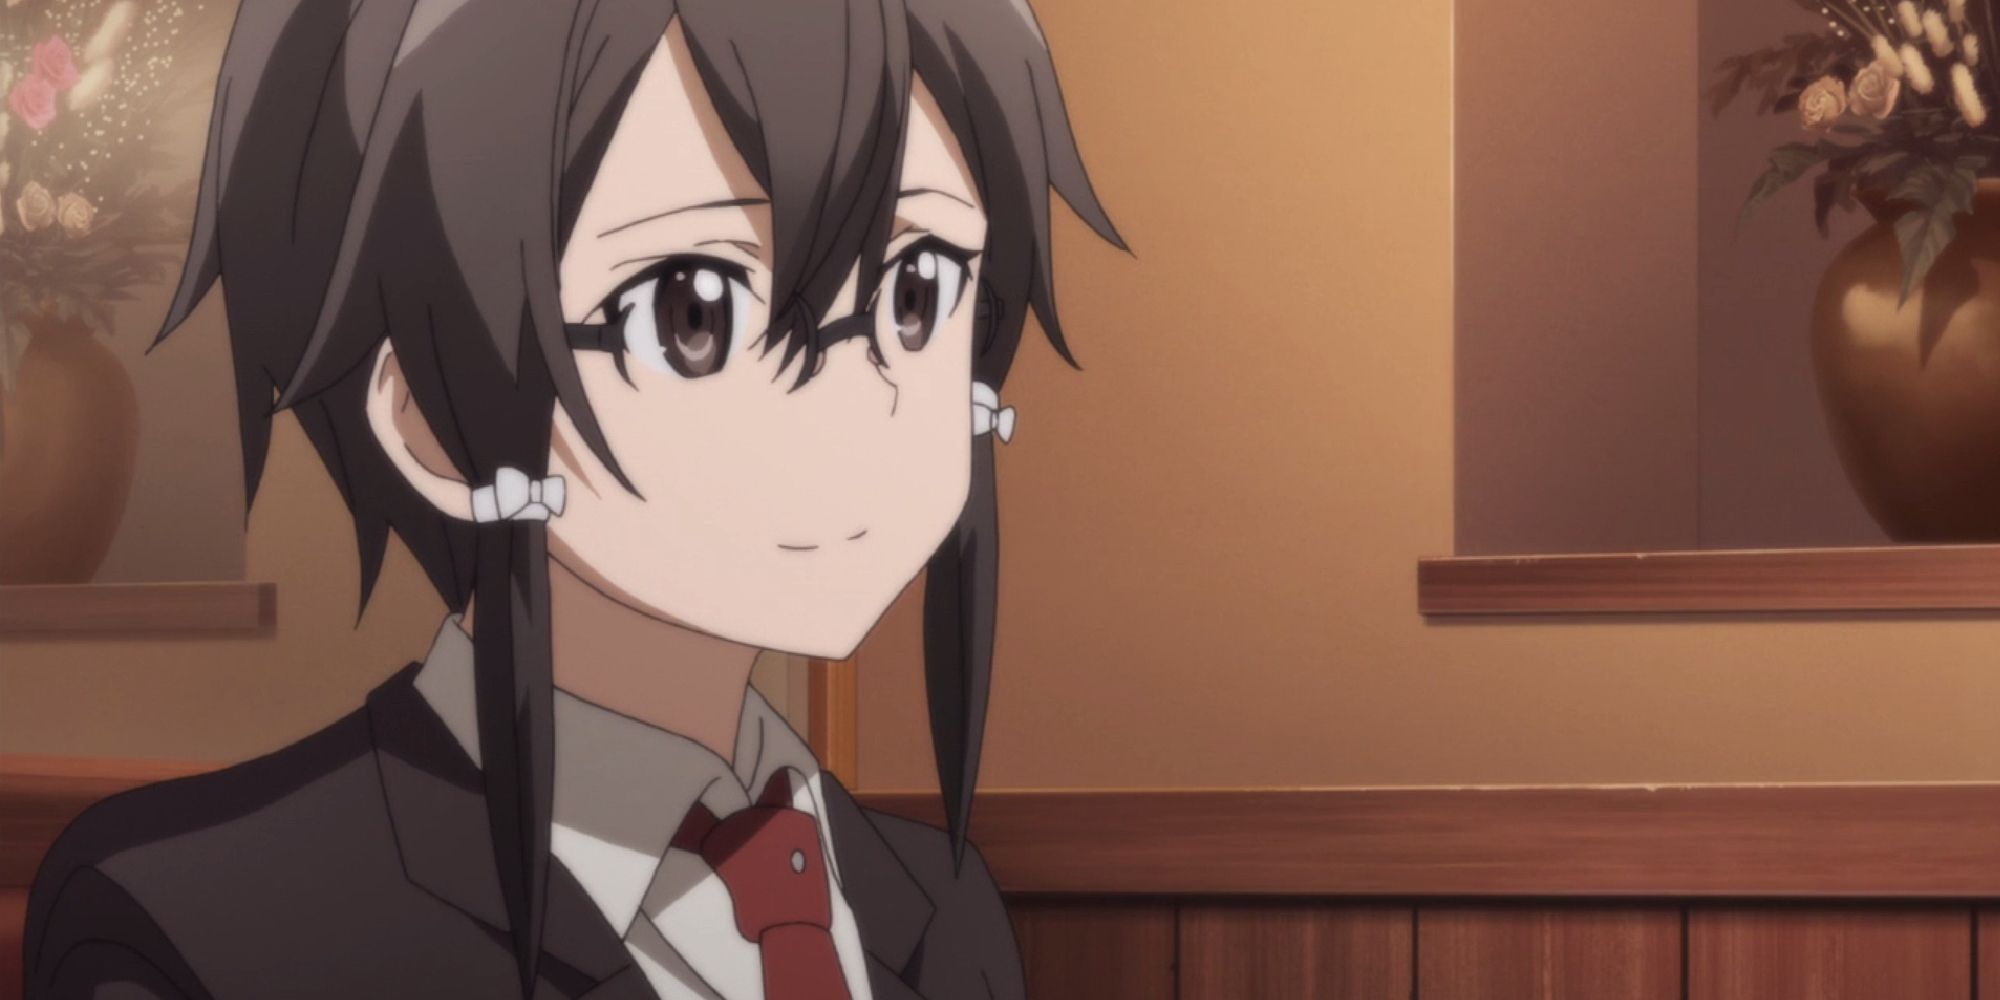 Asada Shino in her real-life look with glasses and school uniform in Sword Art Online